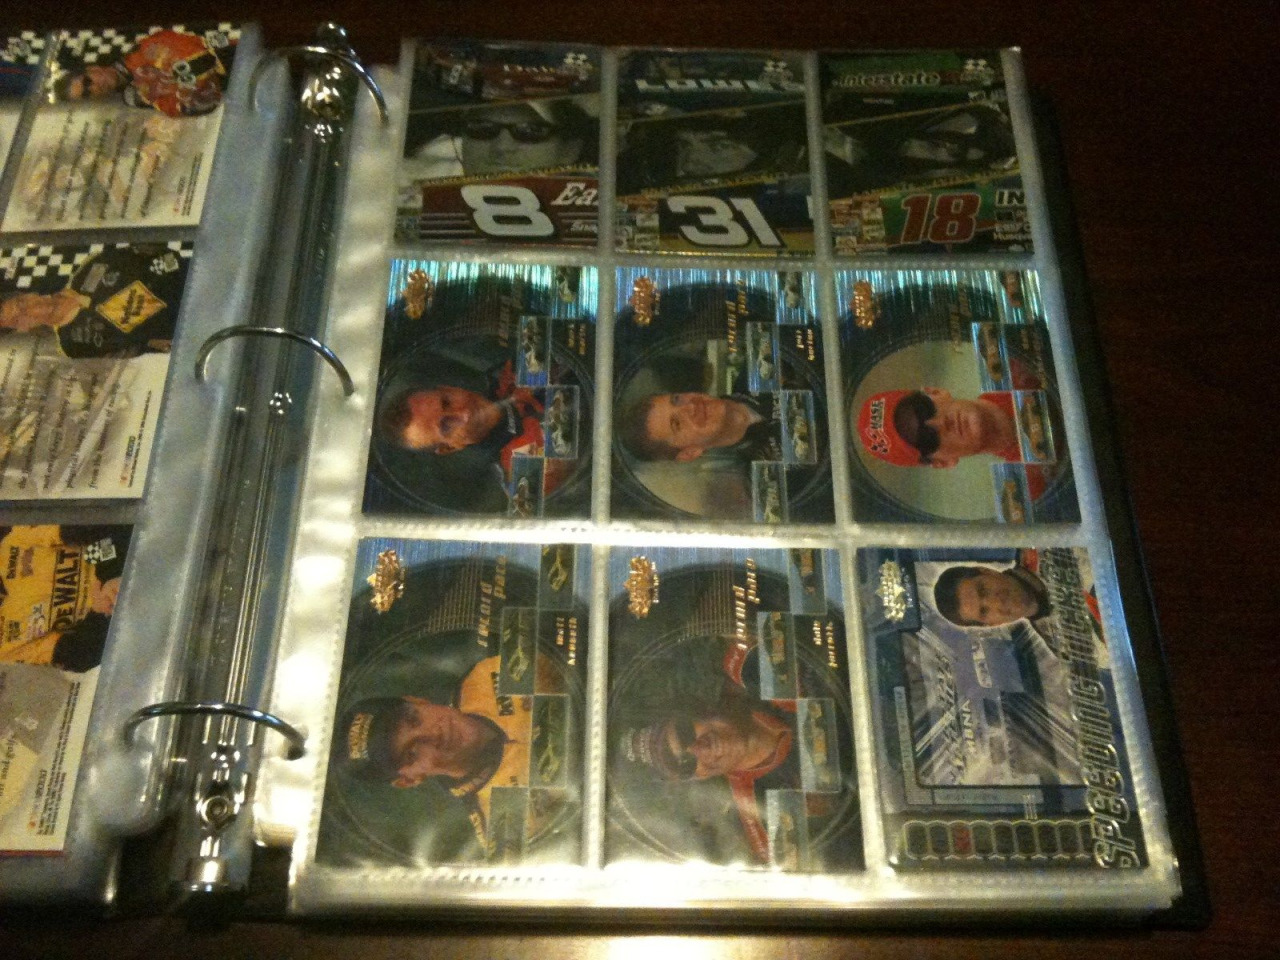 104771002280 - won a collection of nascar insert cards off ebay_7.jpg